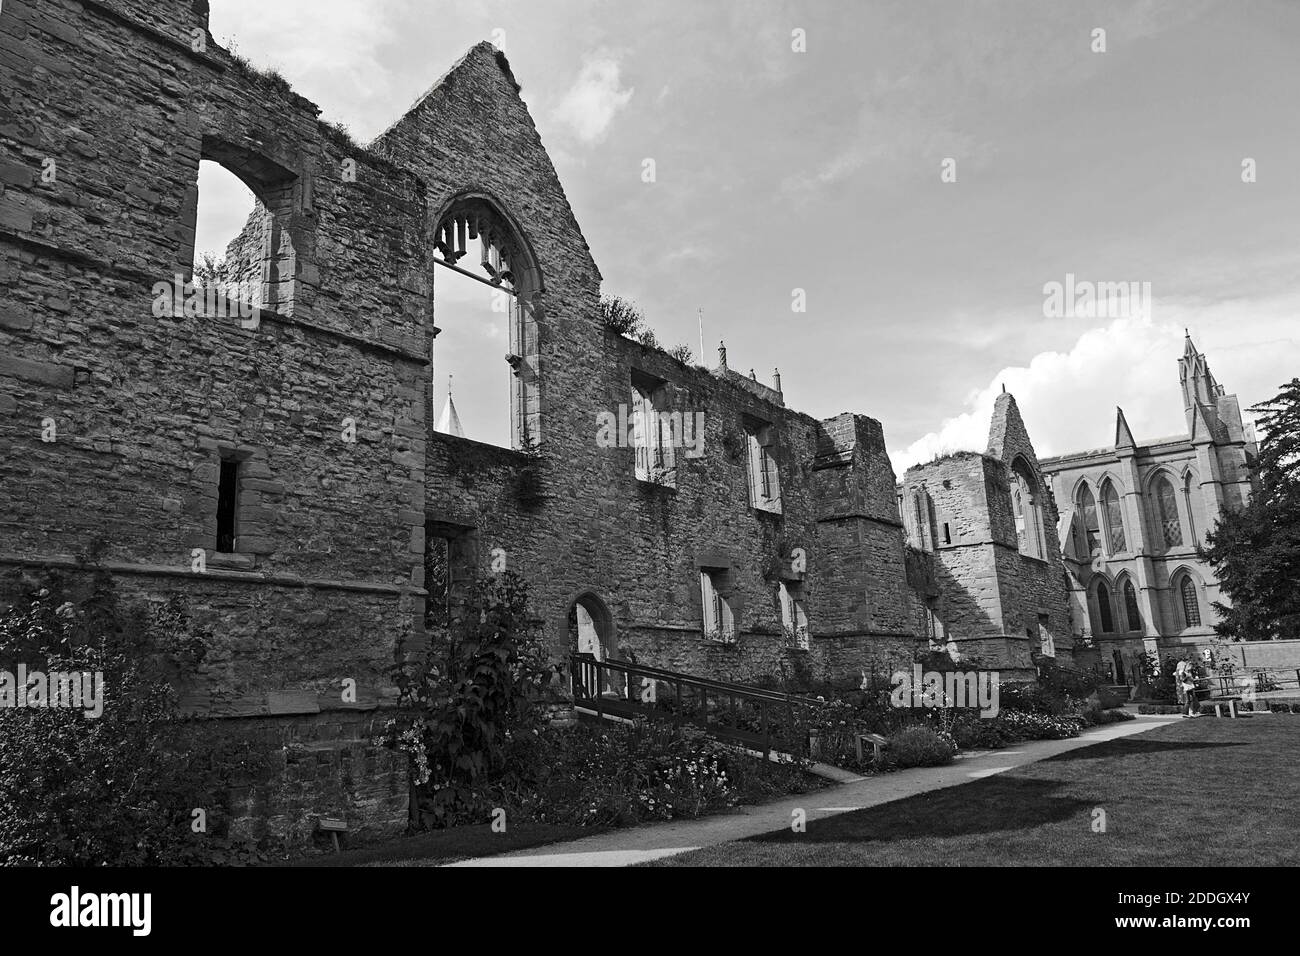 Remains of the Archbishops of York's Southwell Palace circa 1400 adjacent to Southwell Minster, Nottinghamshire Stock Photo